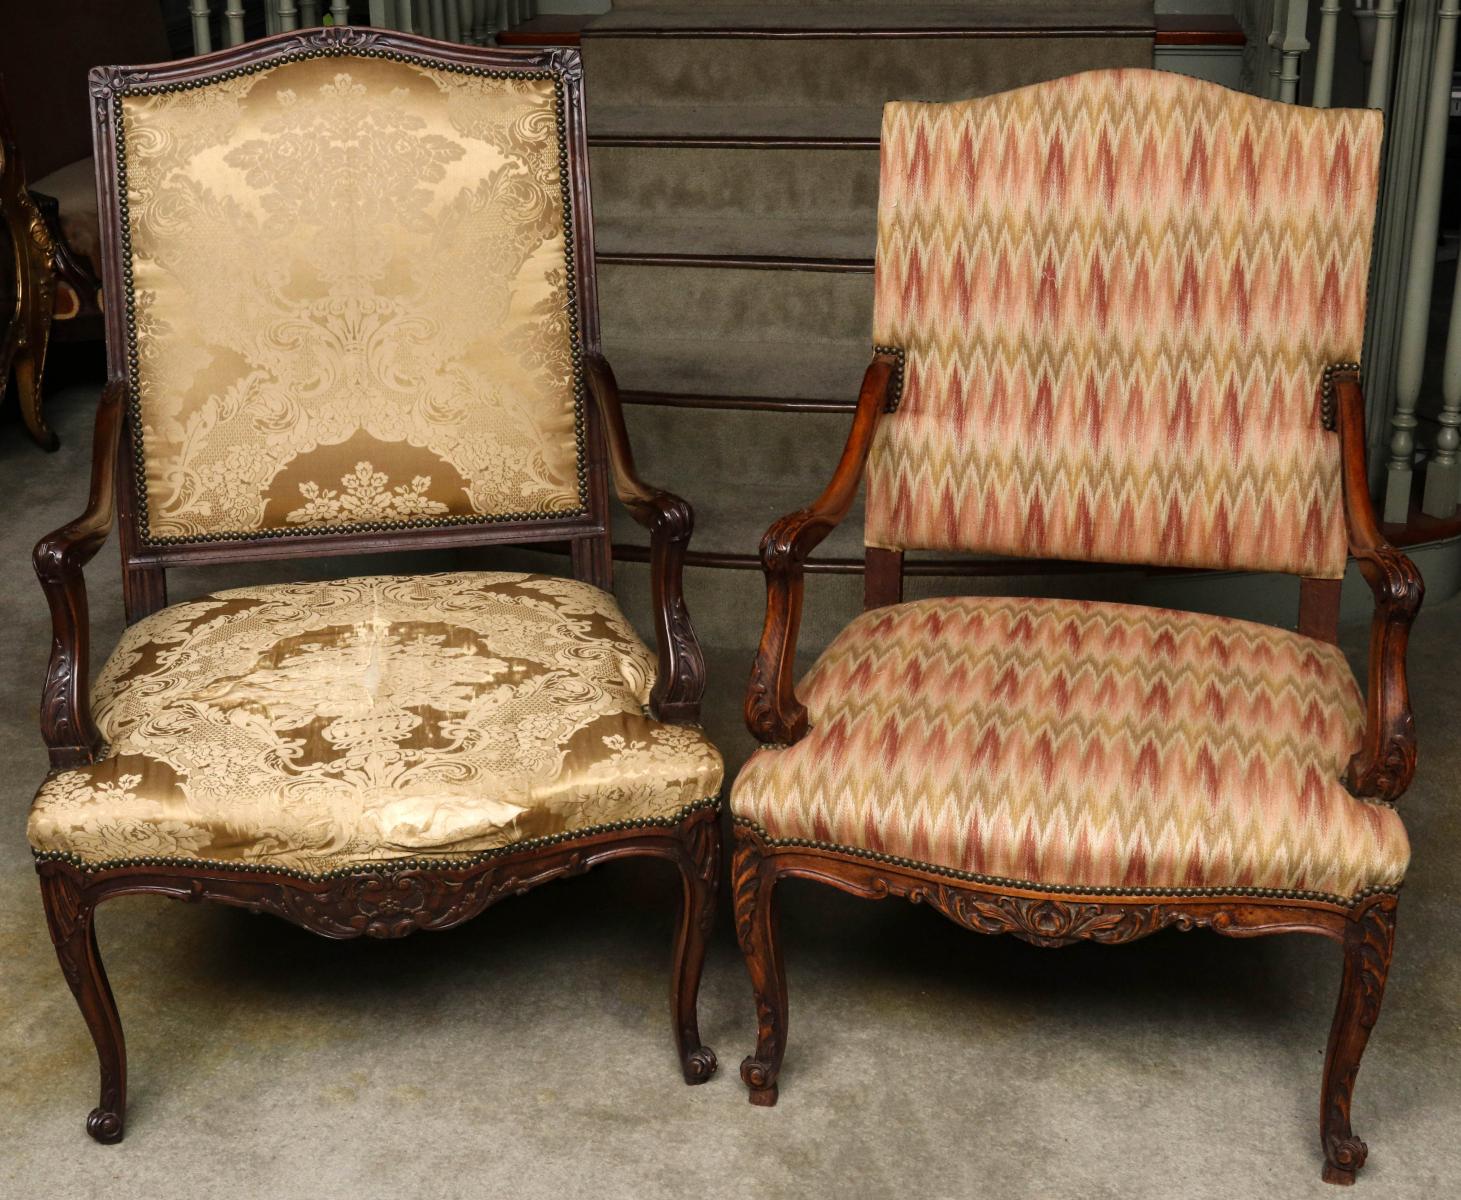 TWO EARLY 20TH CENTURY FRENCH HIGH BACK ARM CHAIRS